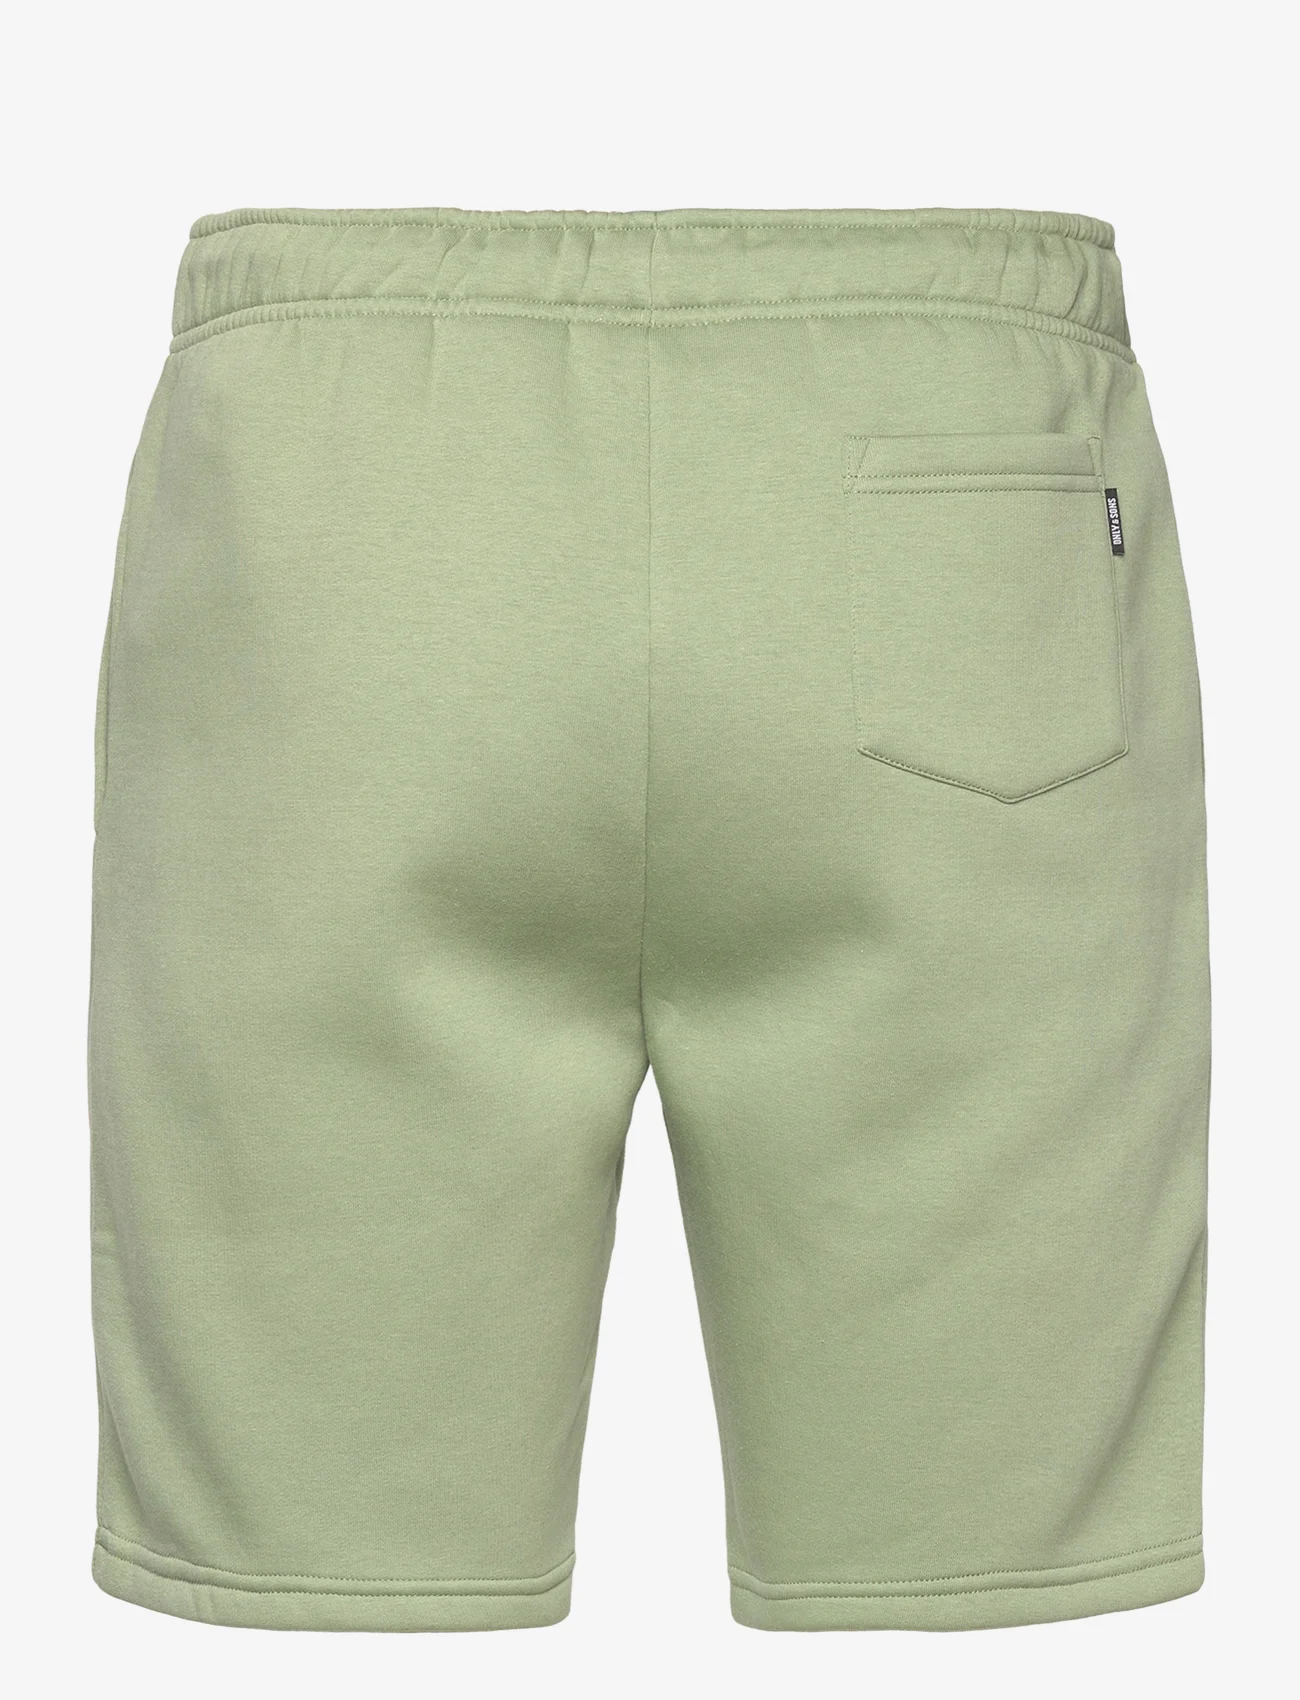 ONLY & SONS - ONSCERES SWEAT SHORTS - zemākās cenas - hedge green - 1